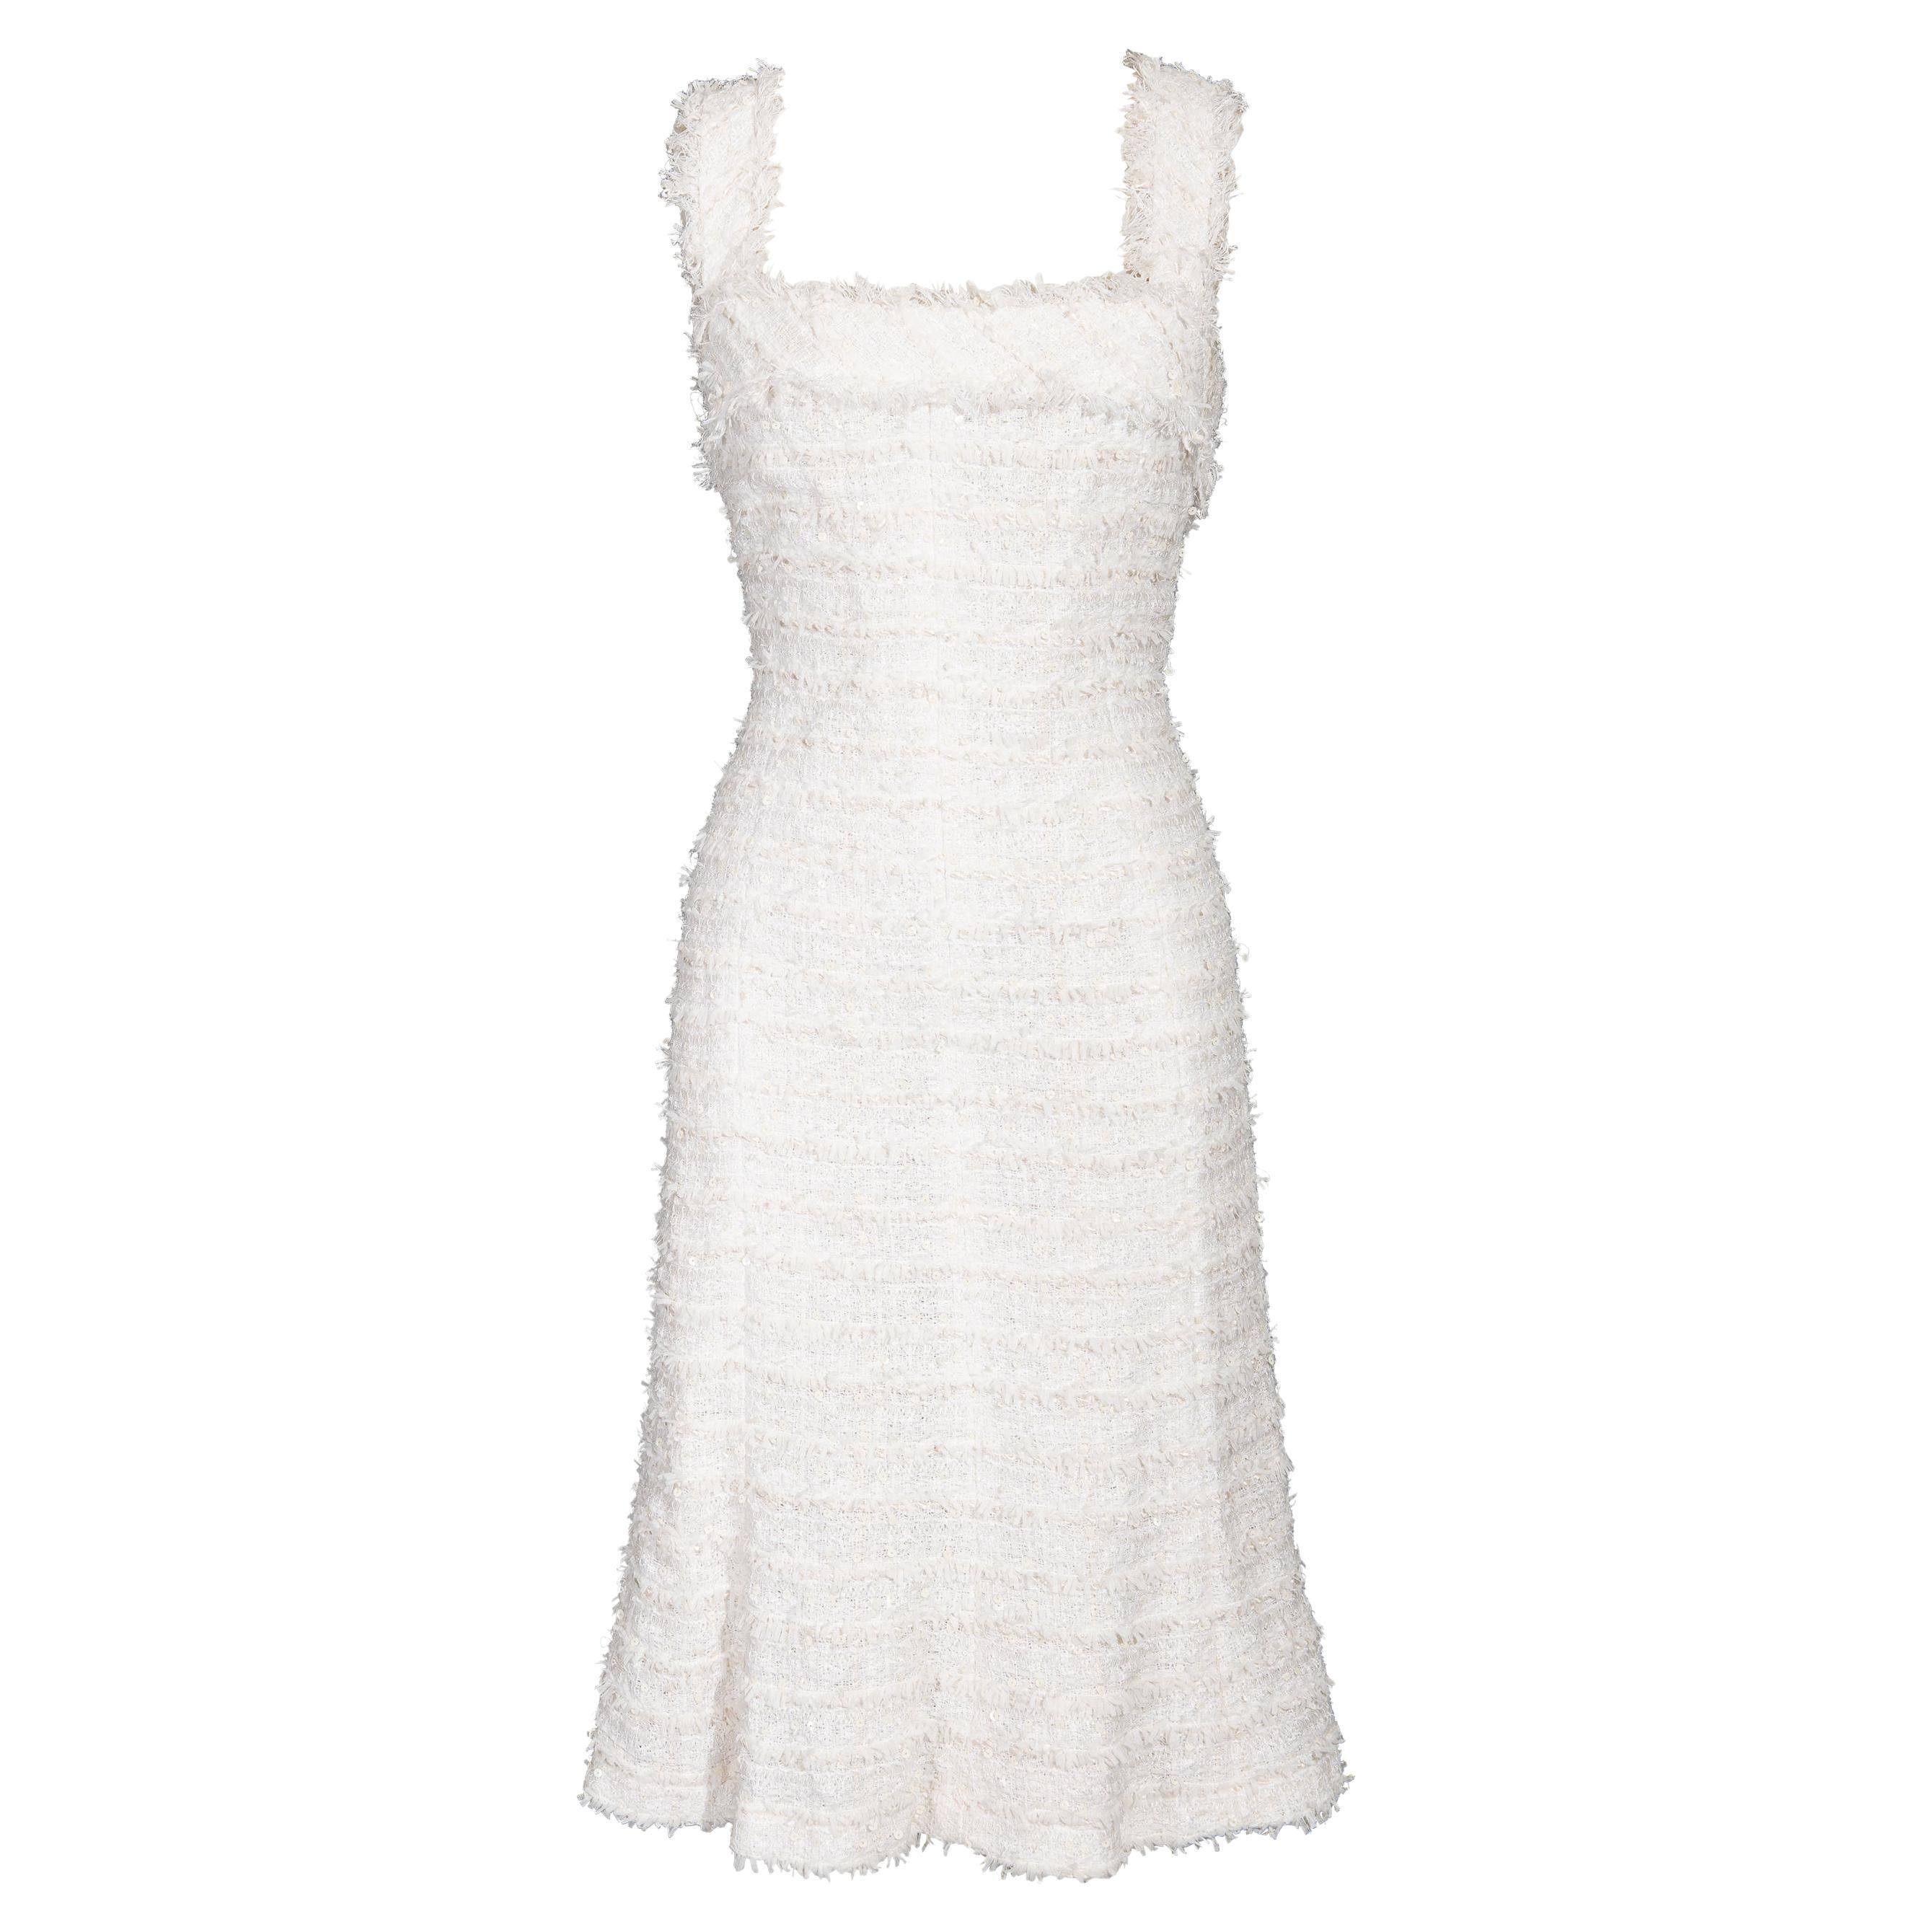 S/S 2005 Chanel by Karl Lagerfeld Metallic White Tweed Above-Knee Dress For Sale